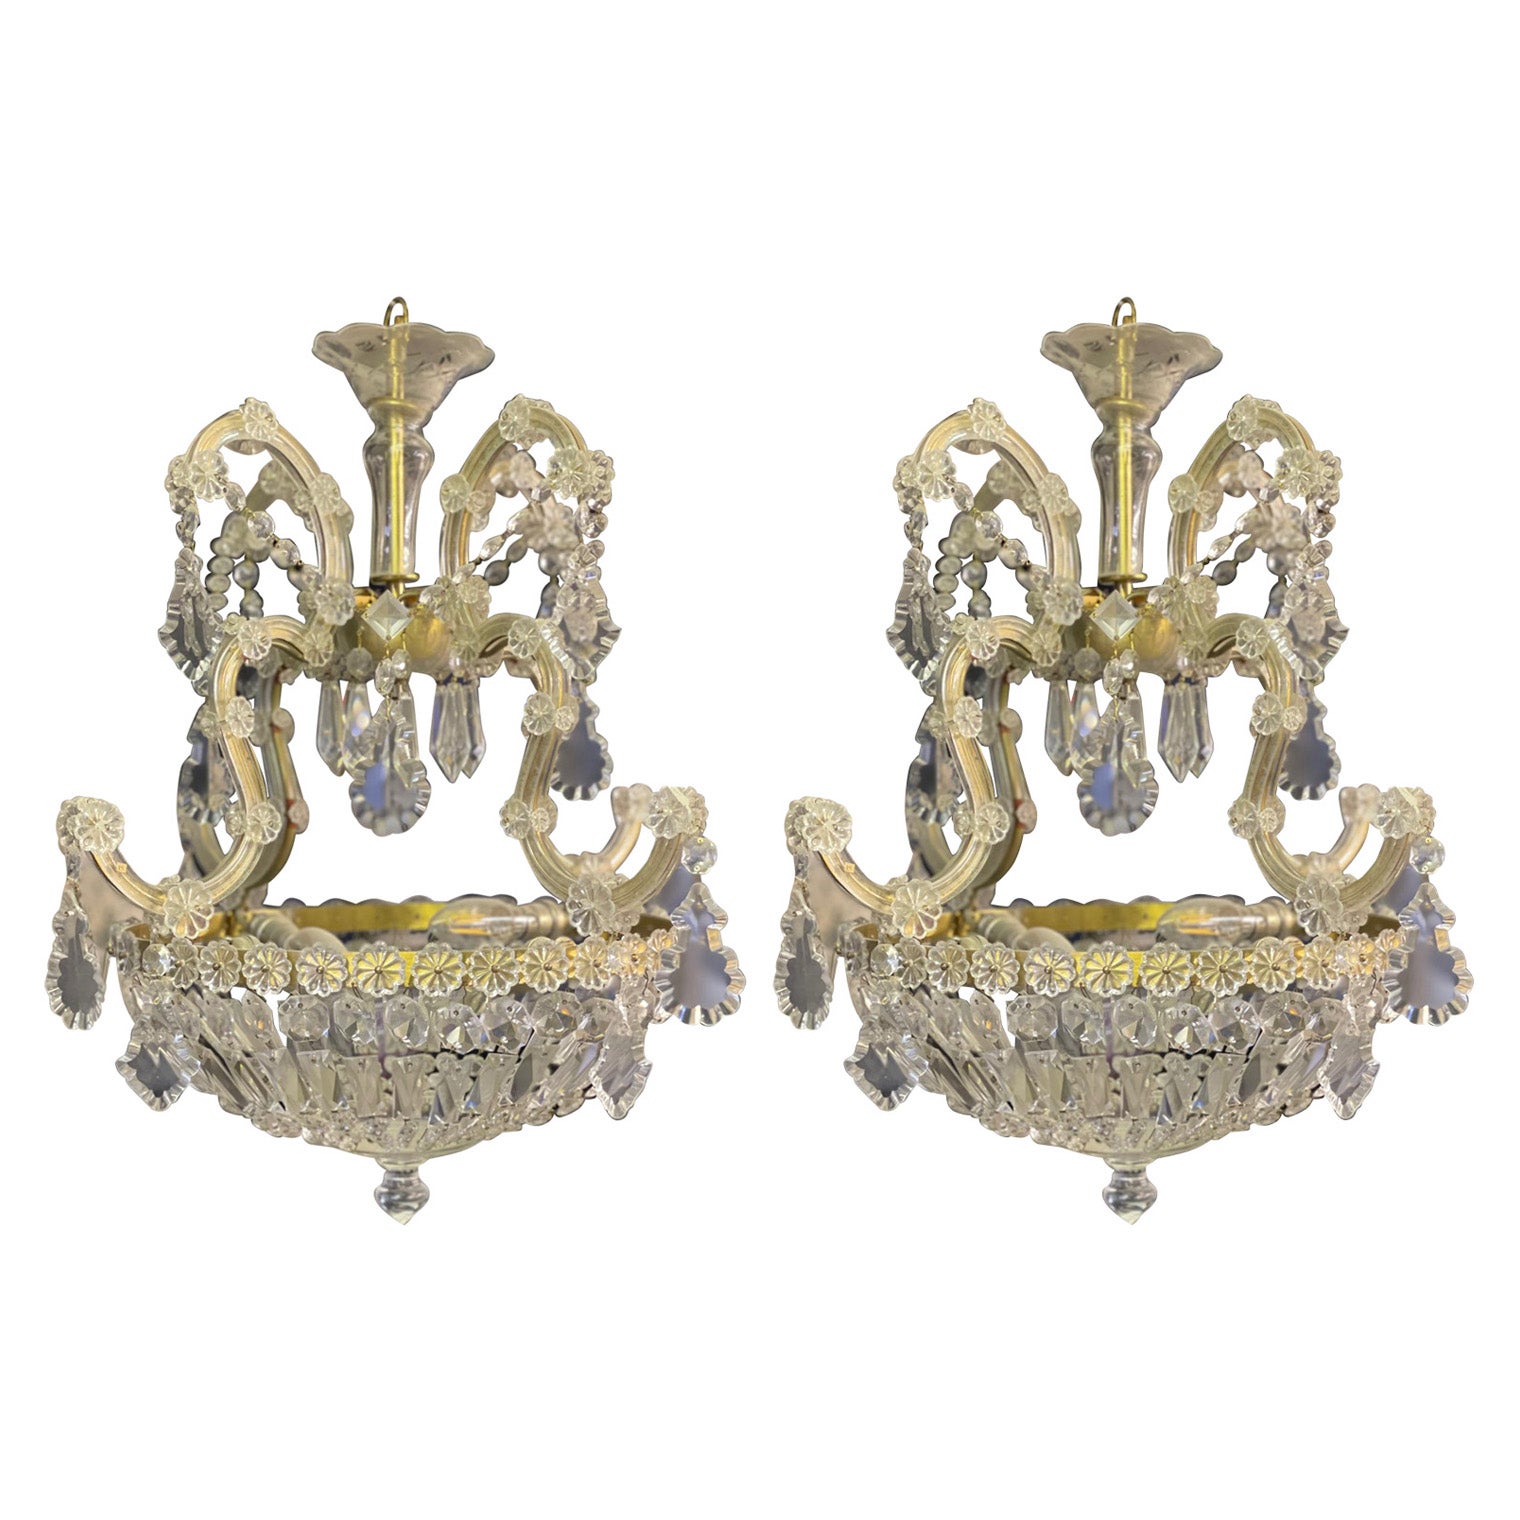 Very Elegent Pair of 20th Century Bag and Tent Style Marie Therese Chandeliers For Sale